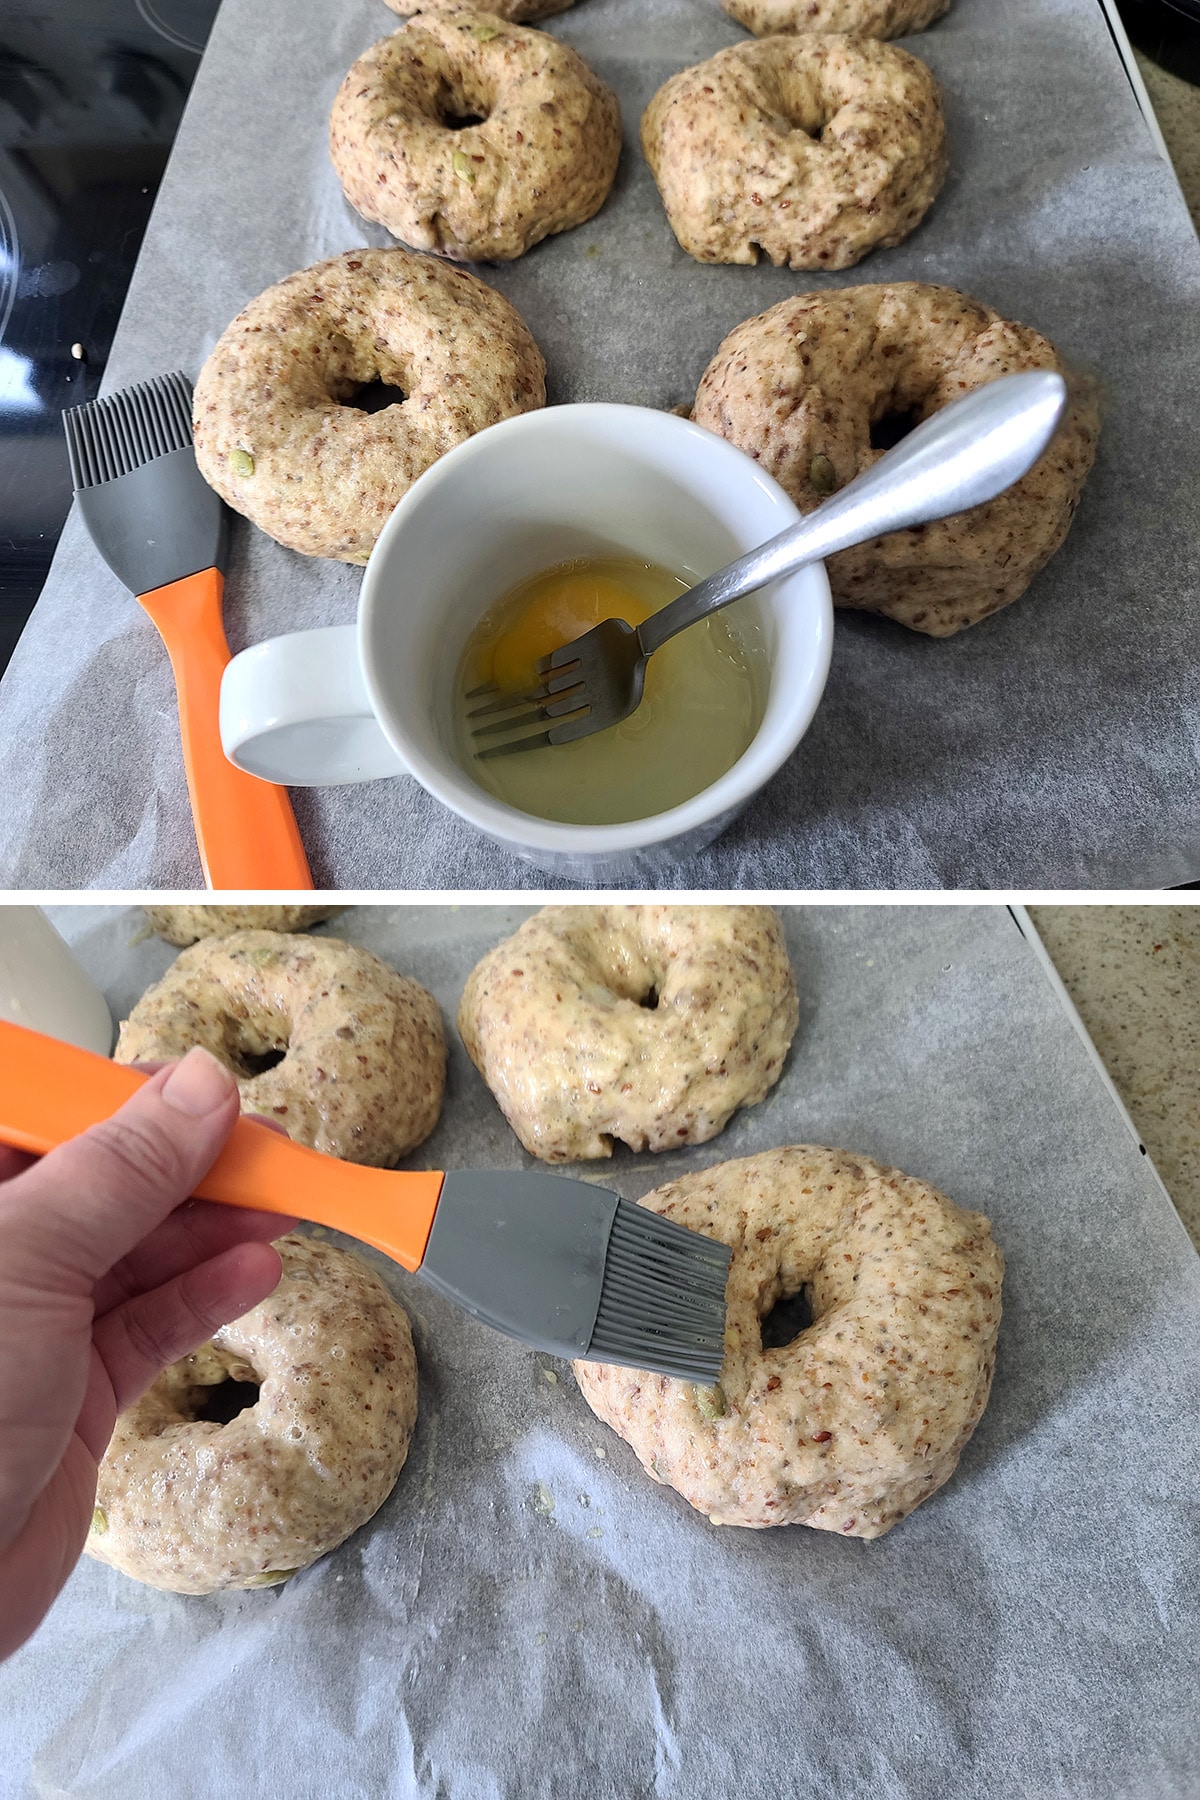 A two part image showing water and an egg in a white coffee mug, then the whisked egg mixture being brushed onto the raw bagels.